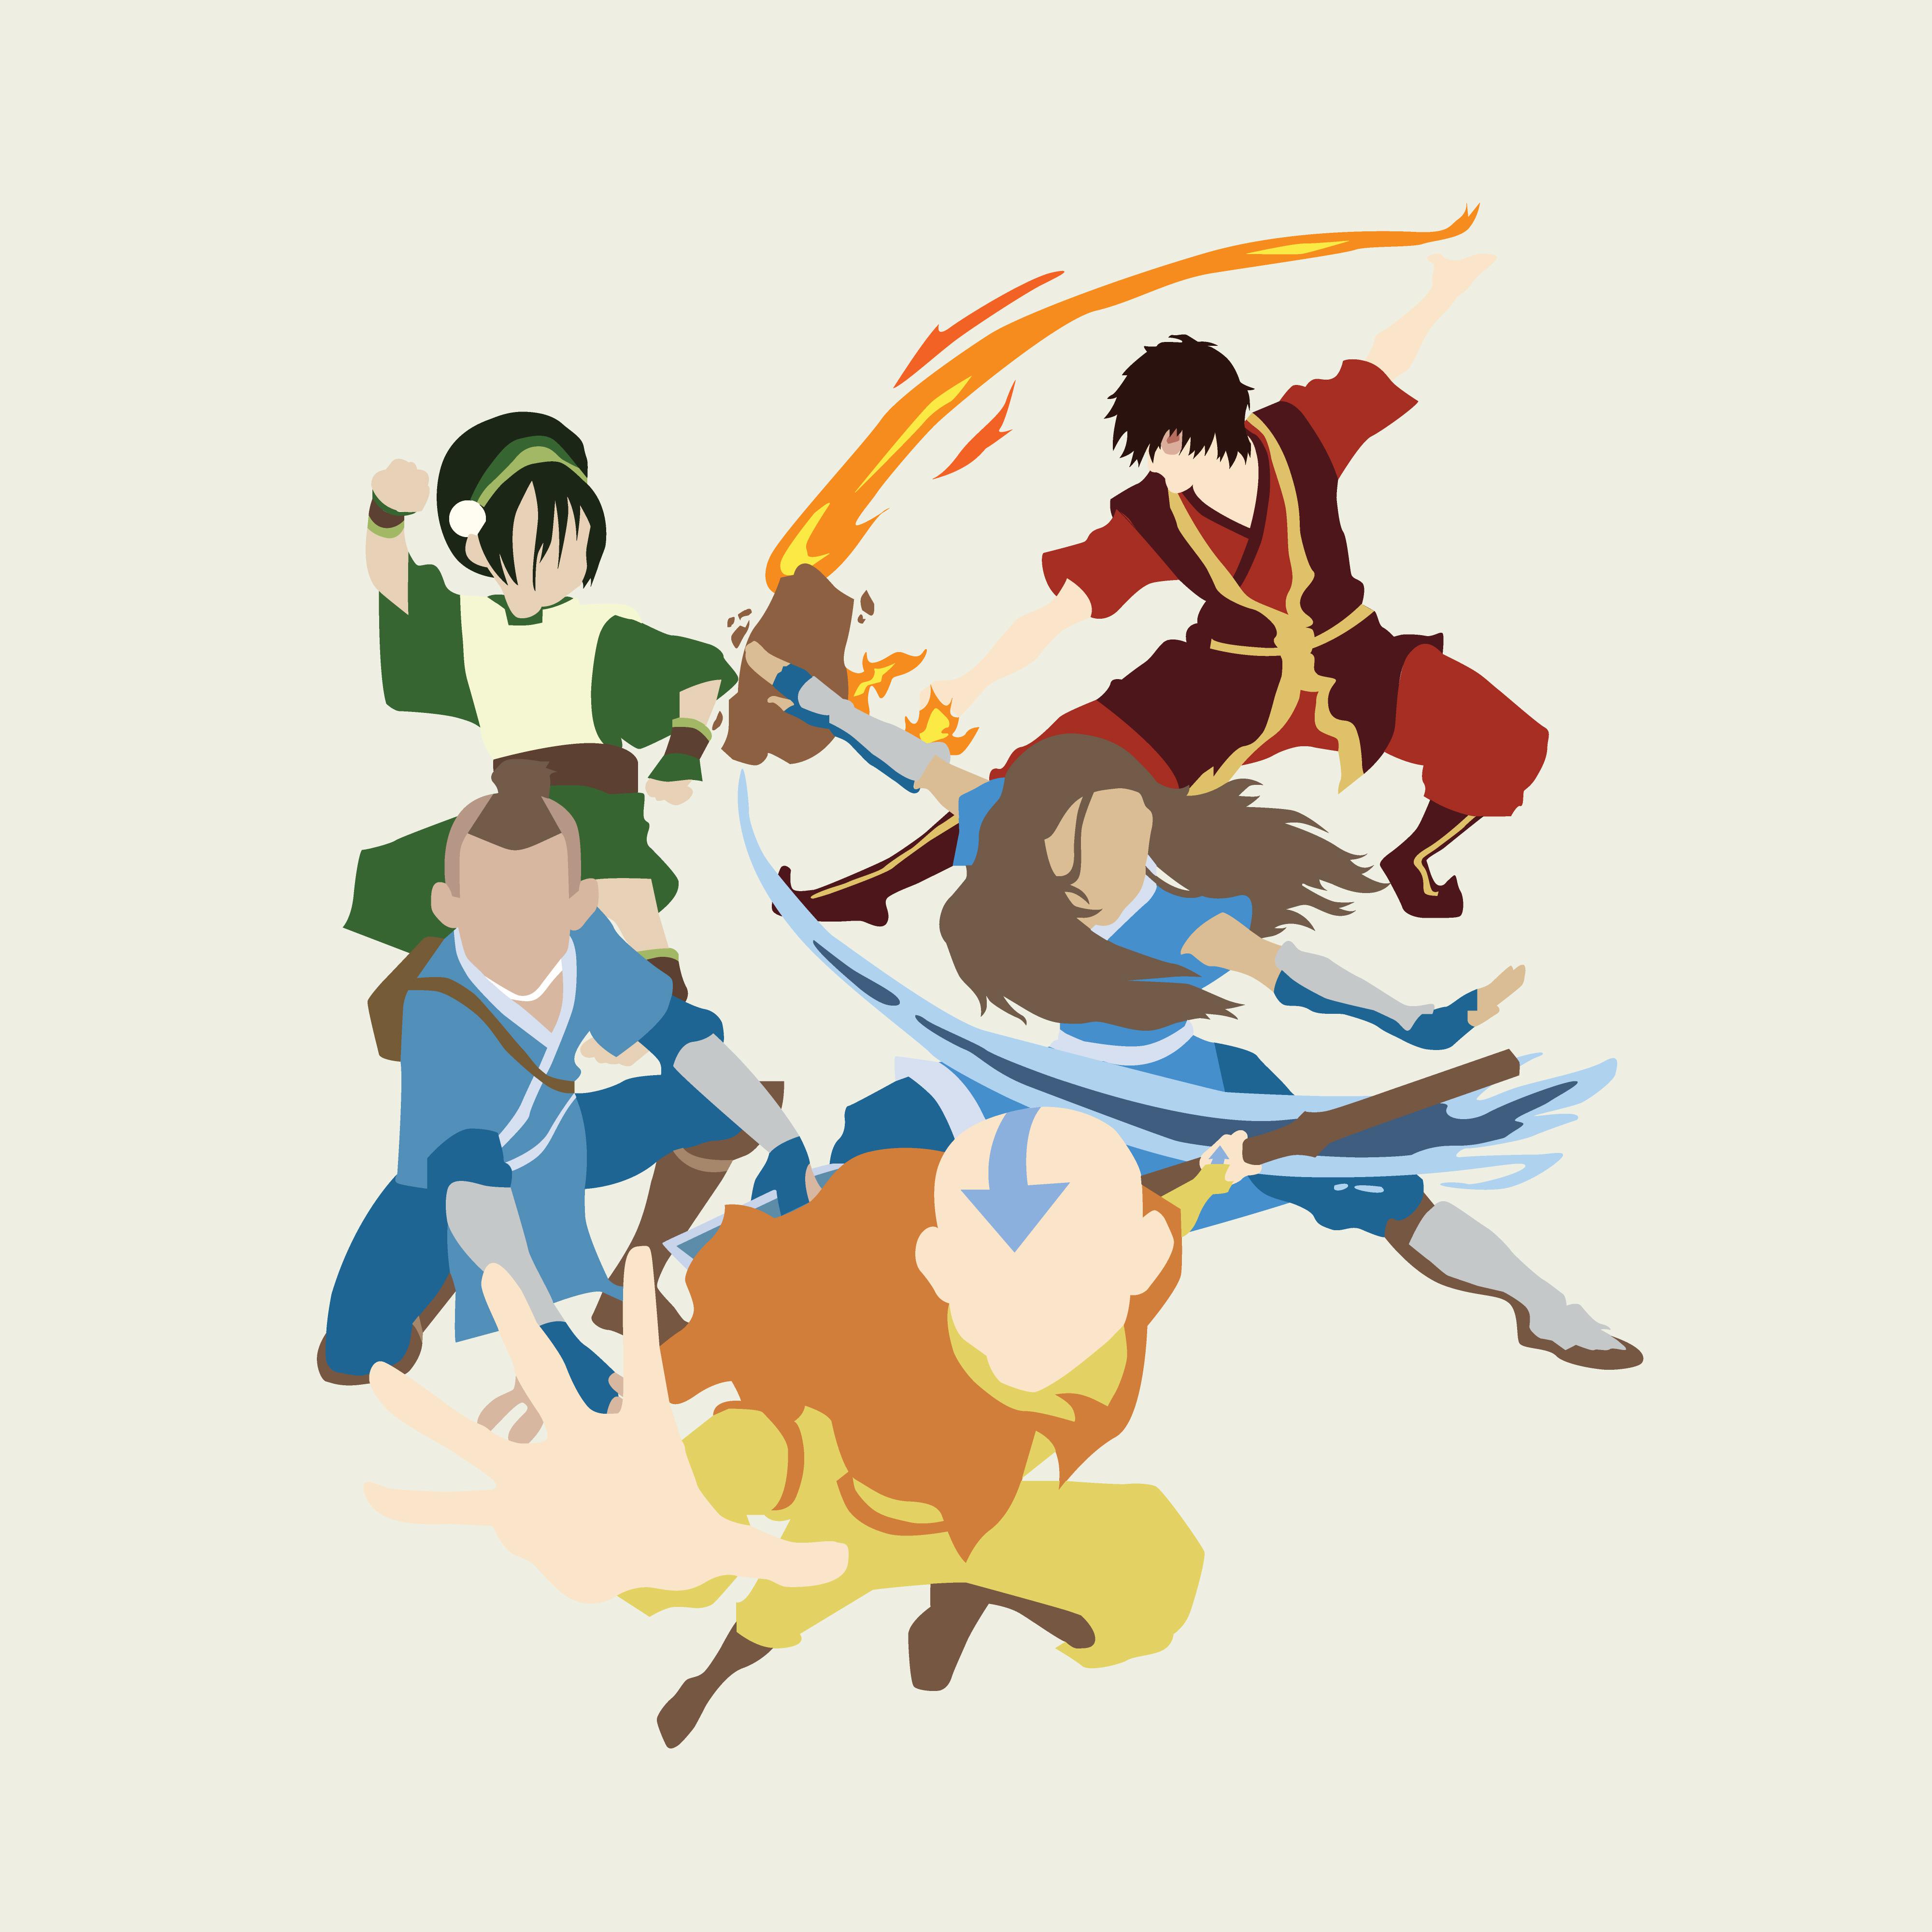 Avatar The Last Airbender Poster.